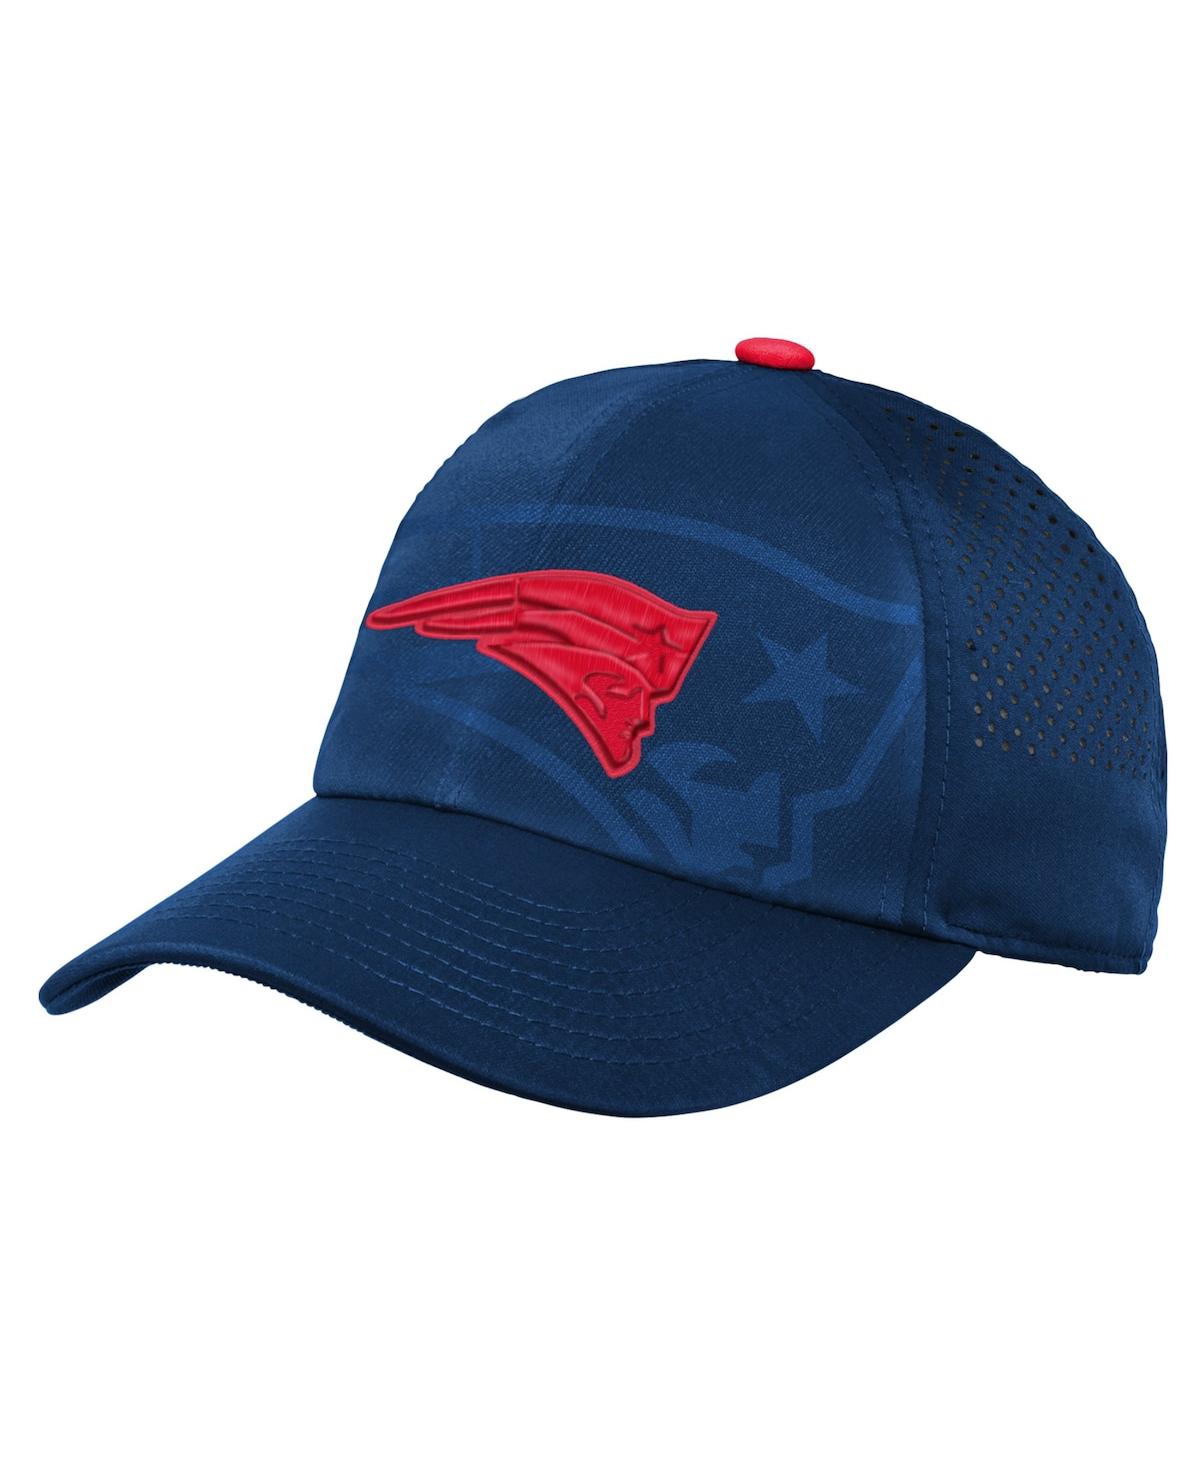 Outerstuff Kids' Youth Boys And Girls Navy New England Patriots Tailgate Adjustable Hat In Blue